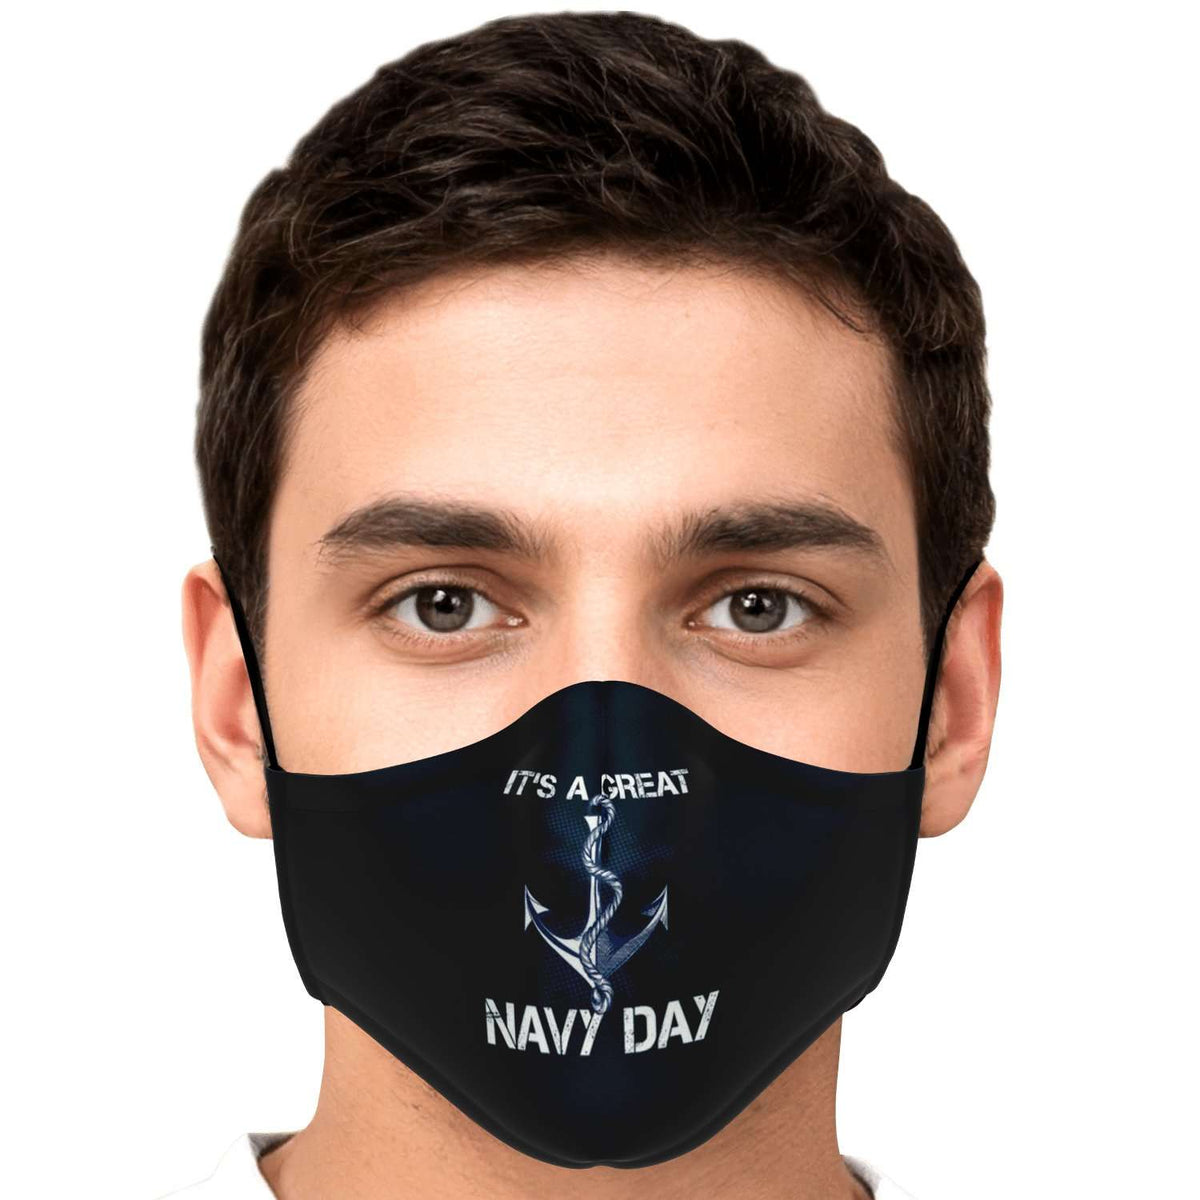 Designs by MyUtopia Shout Out:Its a great Navy Day Adult Fitted Face Mask w adjustable ear loops,Adult / Single / No filters,Fashion Face Mask - AOP